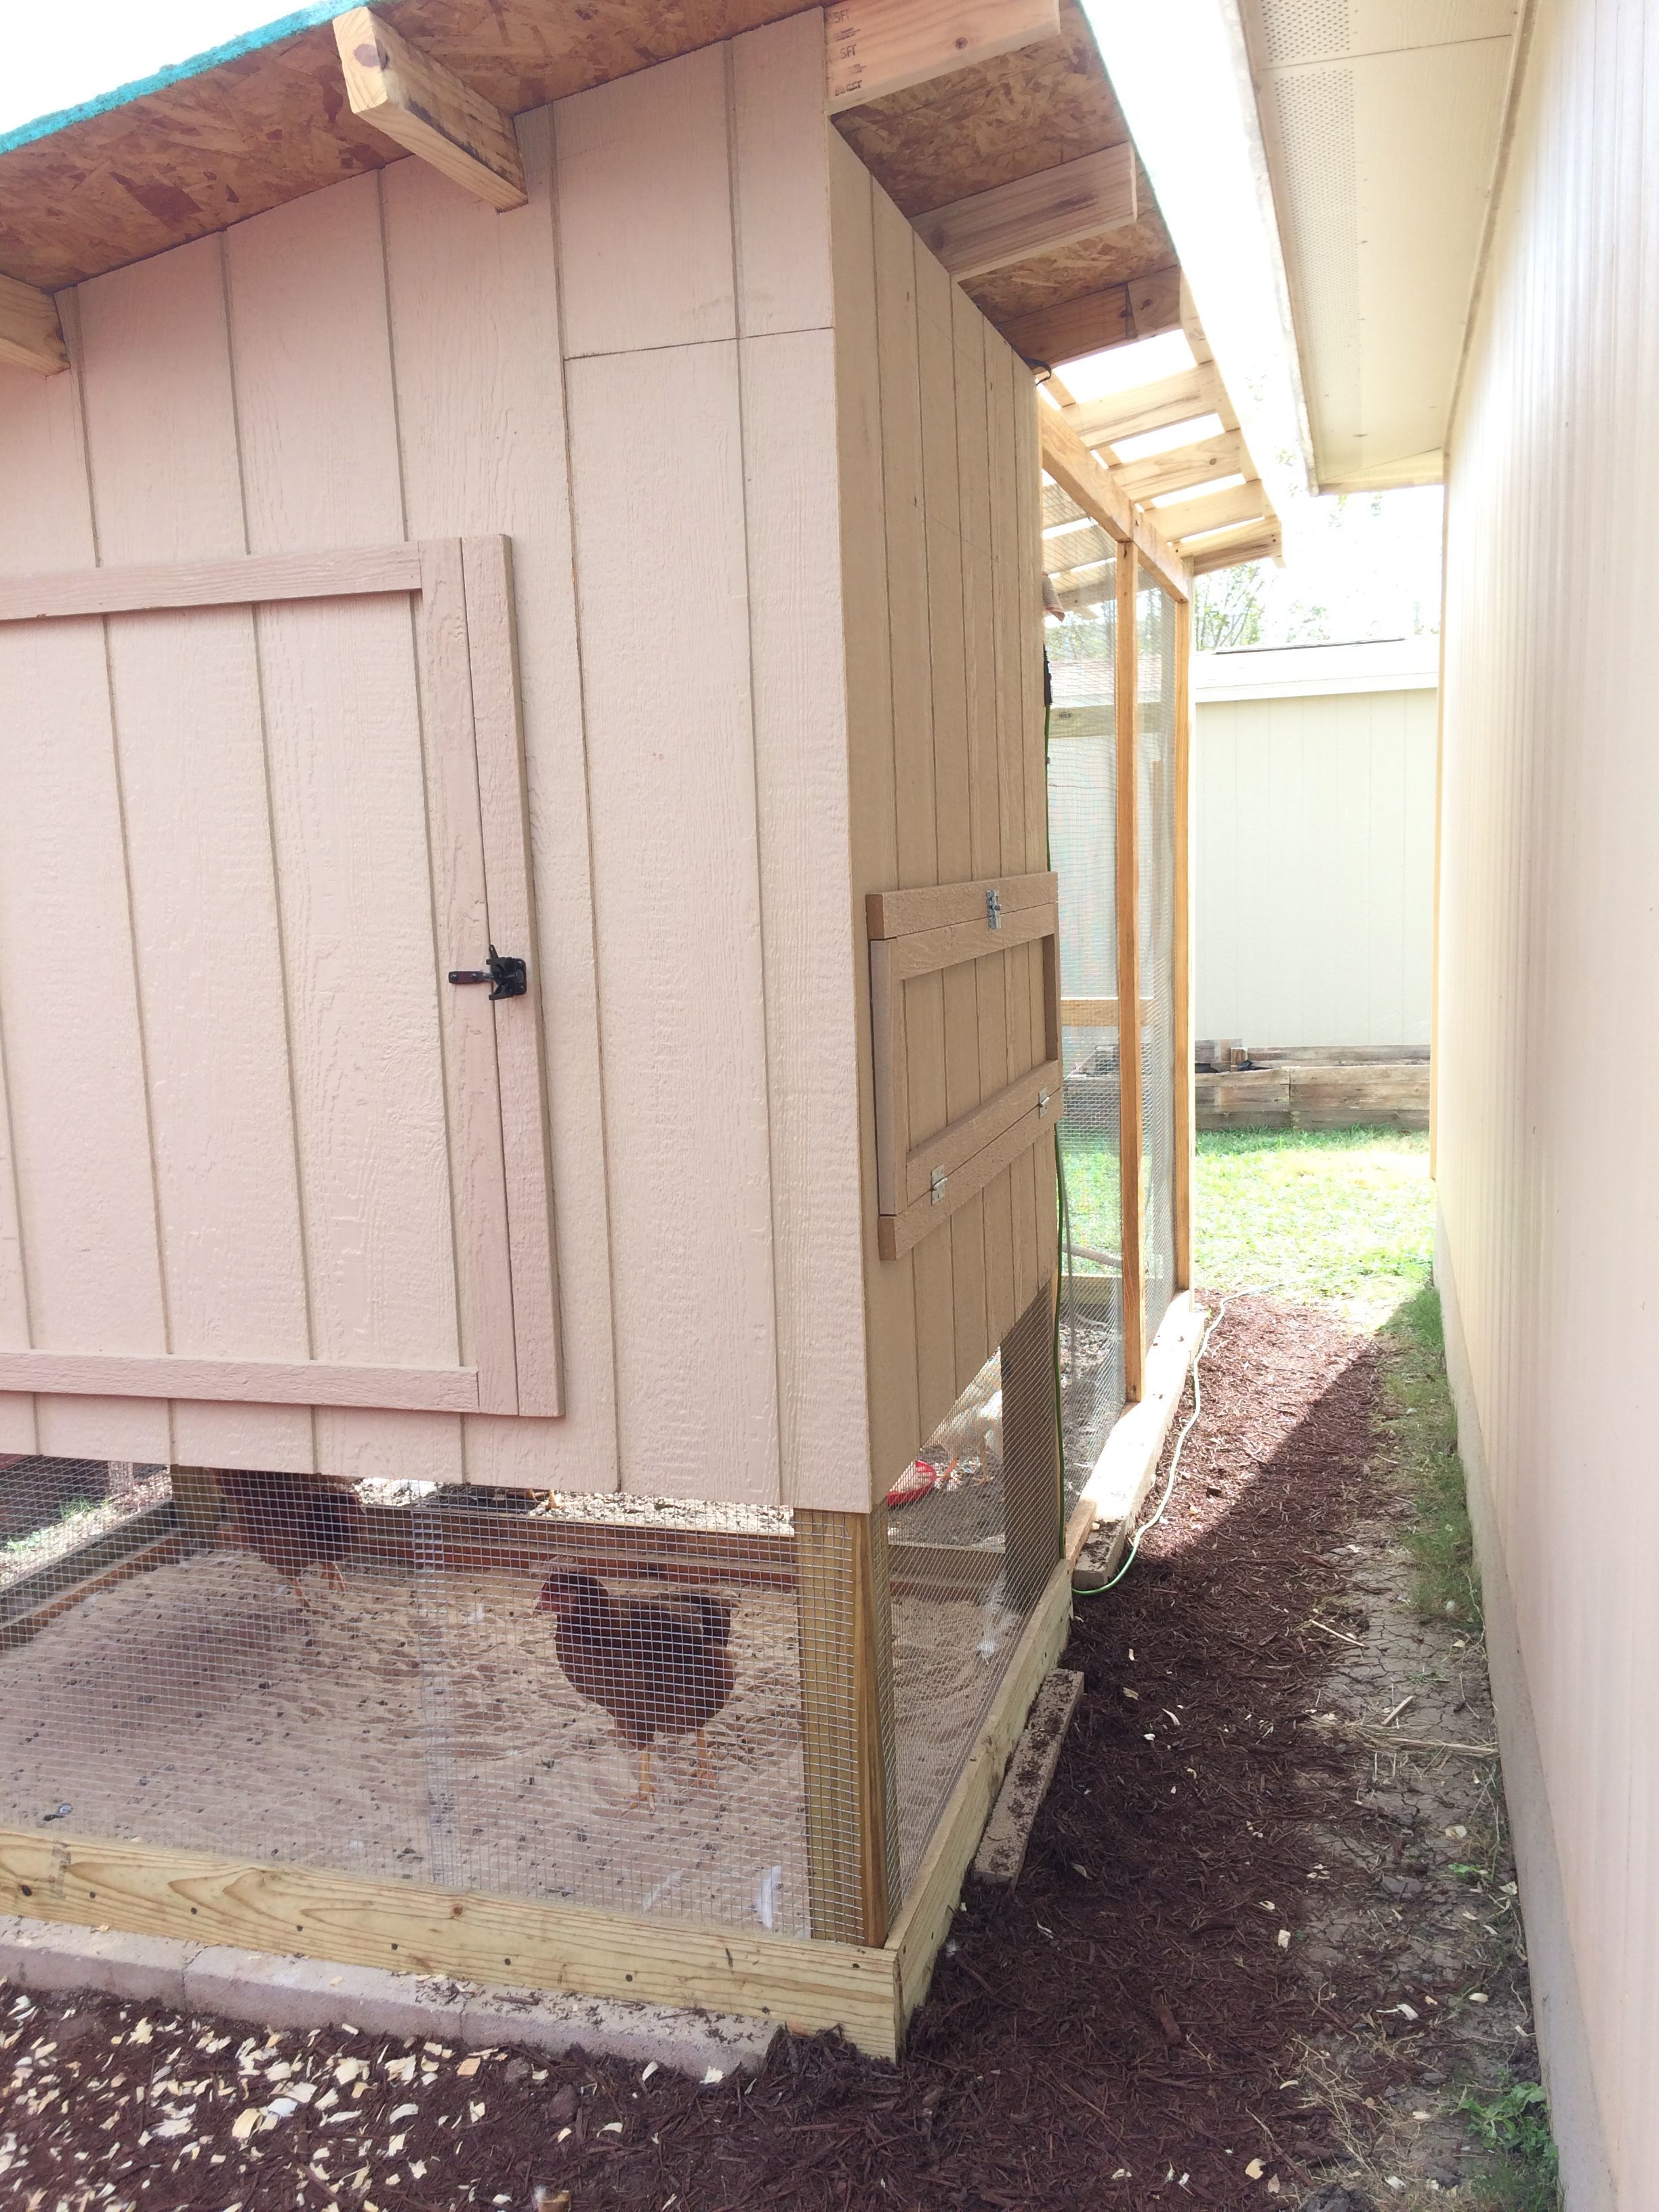 Back View - Big Door for cleaning and small door for collecting eggs. 2 curious hens under the hen house in the sand pit.